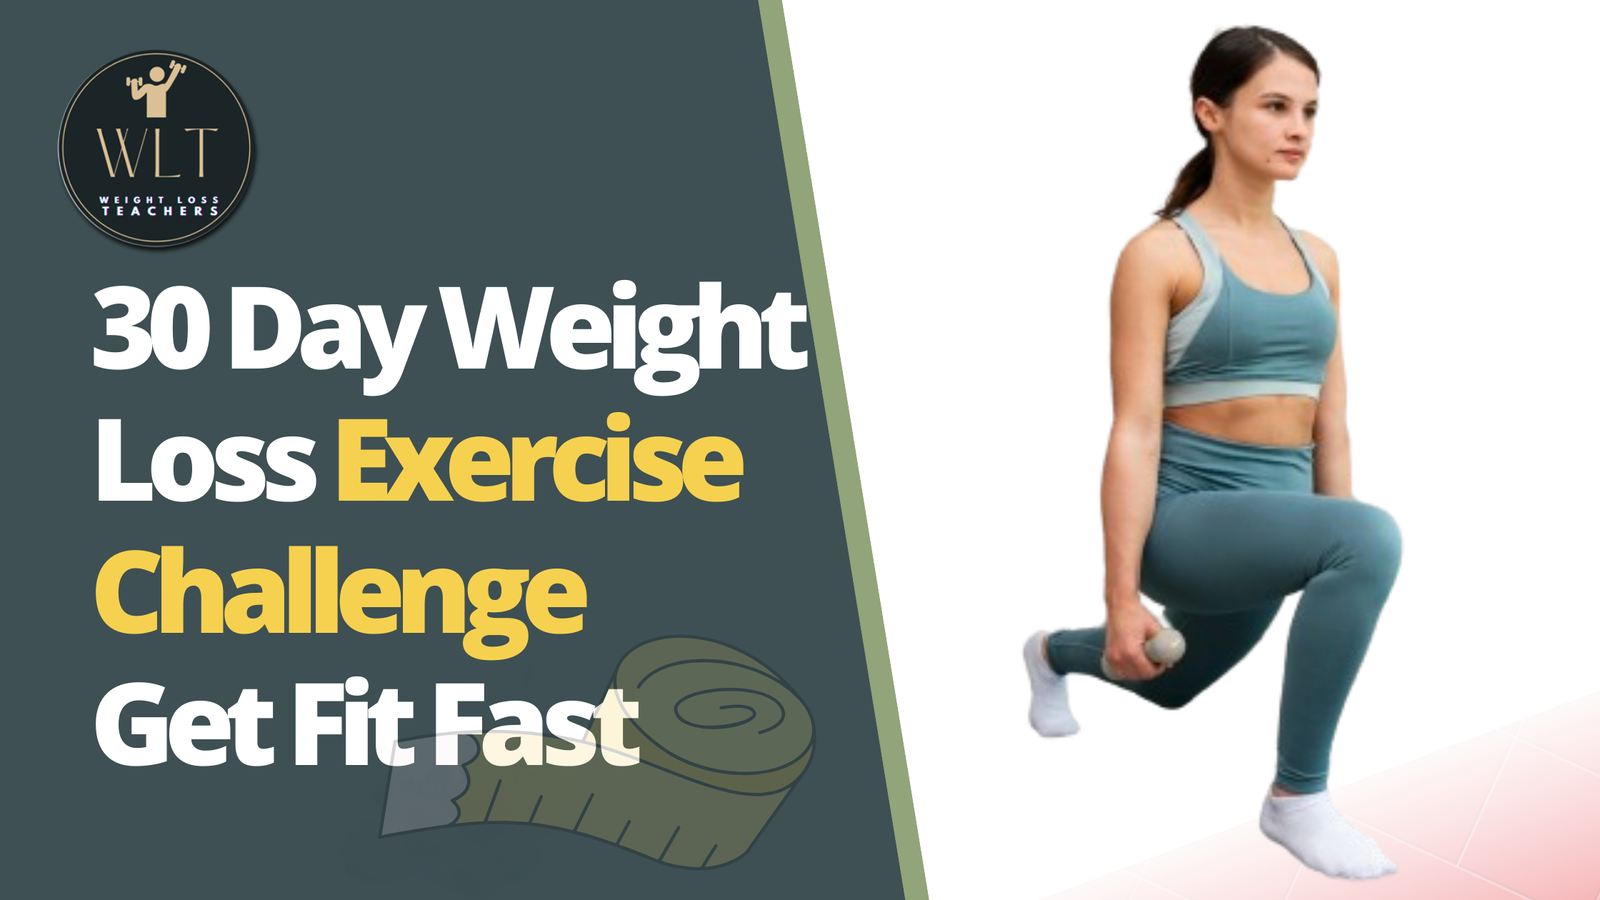 30-day-weight-loss- exercise-challenge-get-fit-fast